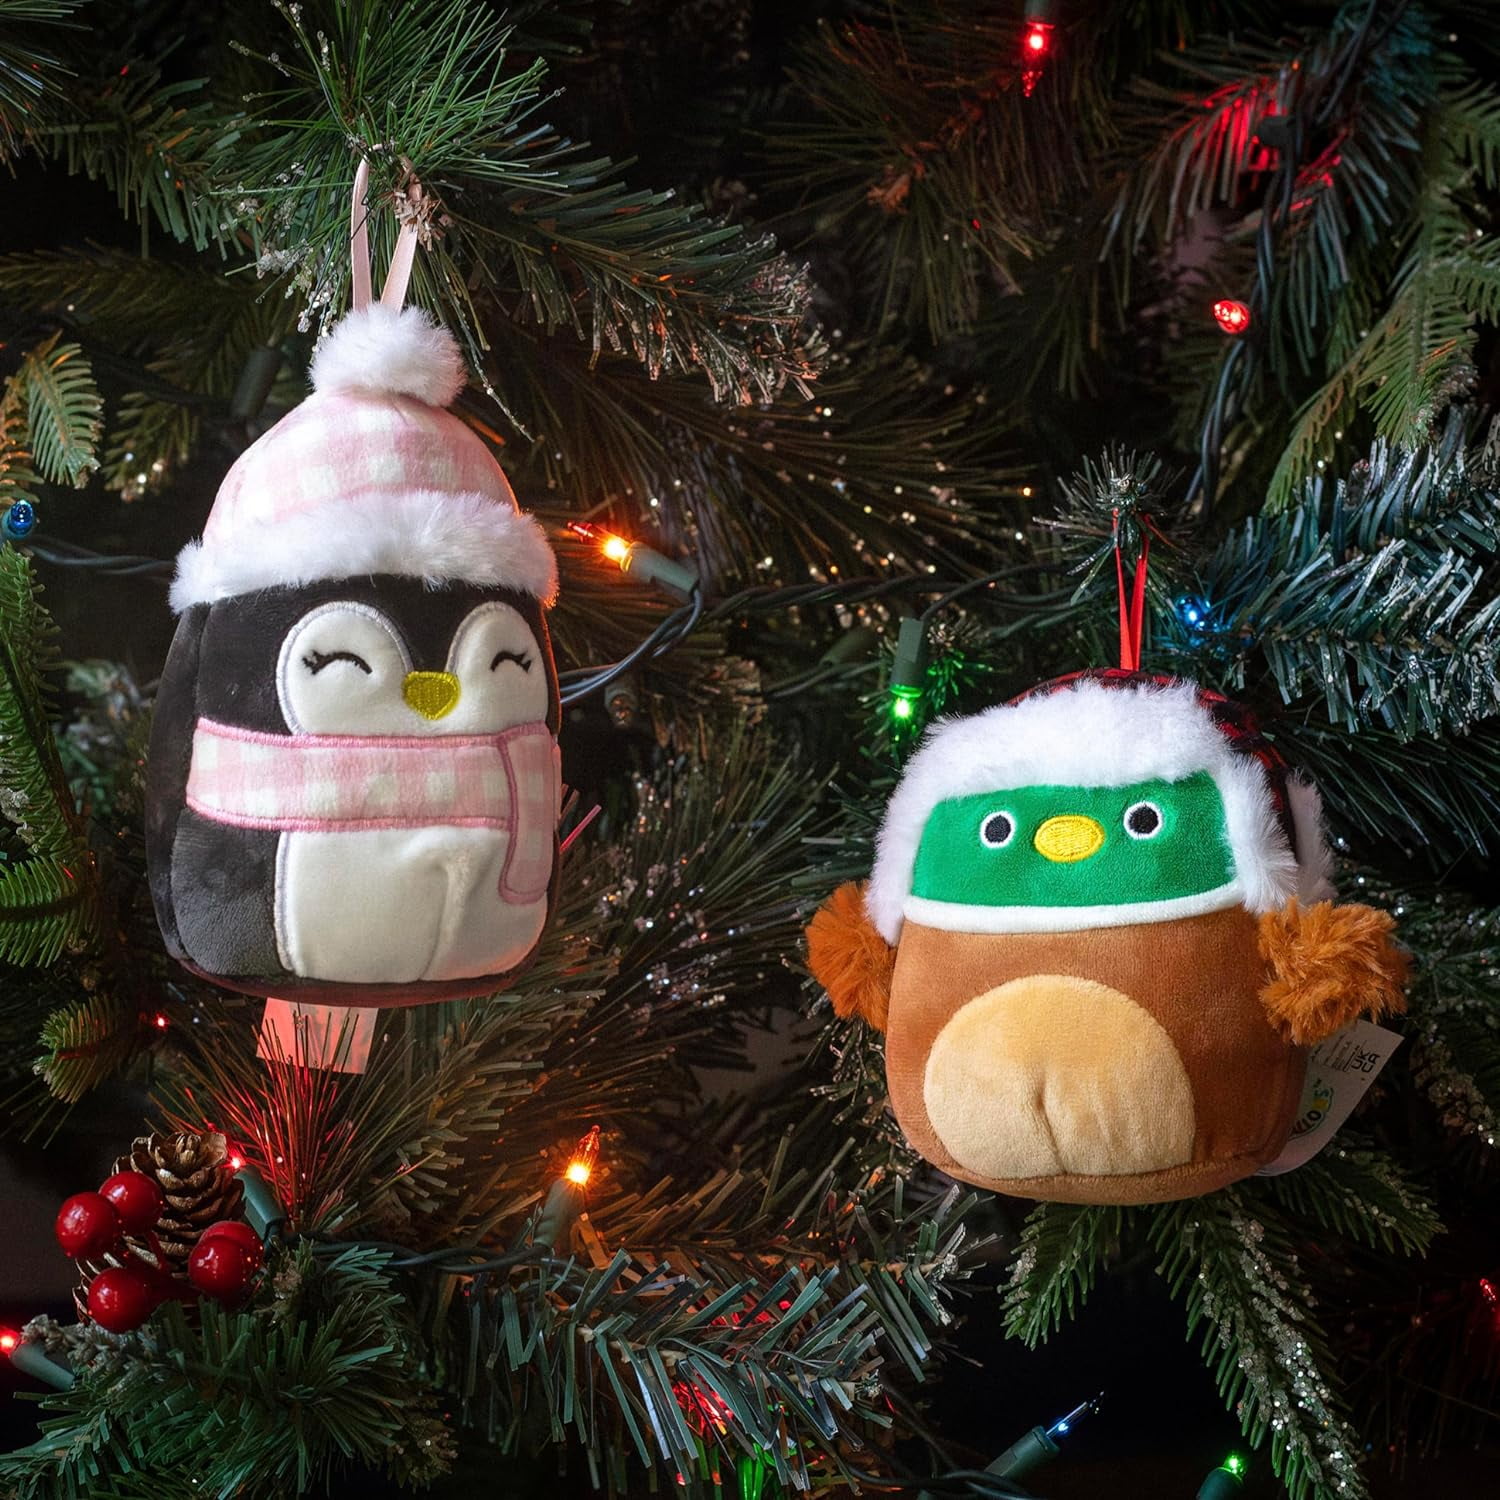 Finally found the squishmallow Christmas ornaments they're so cute